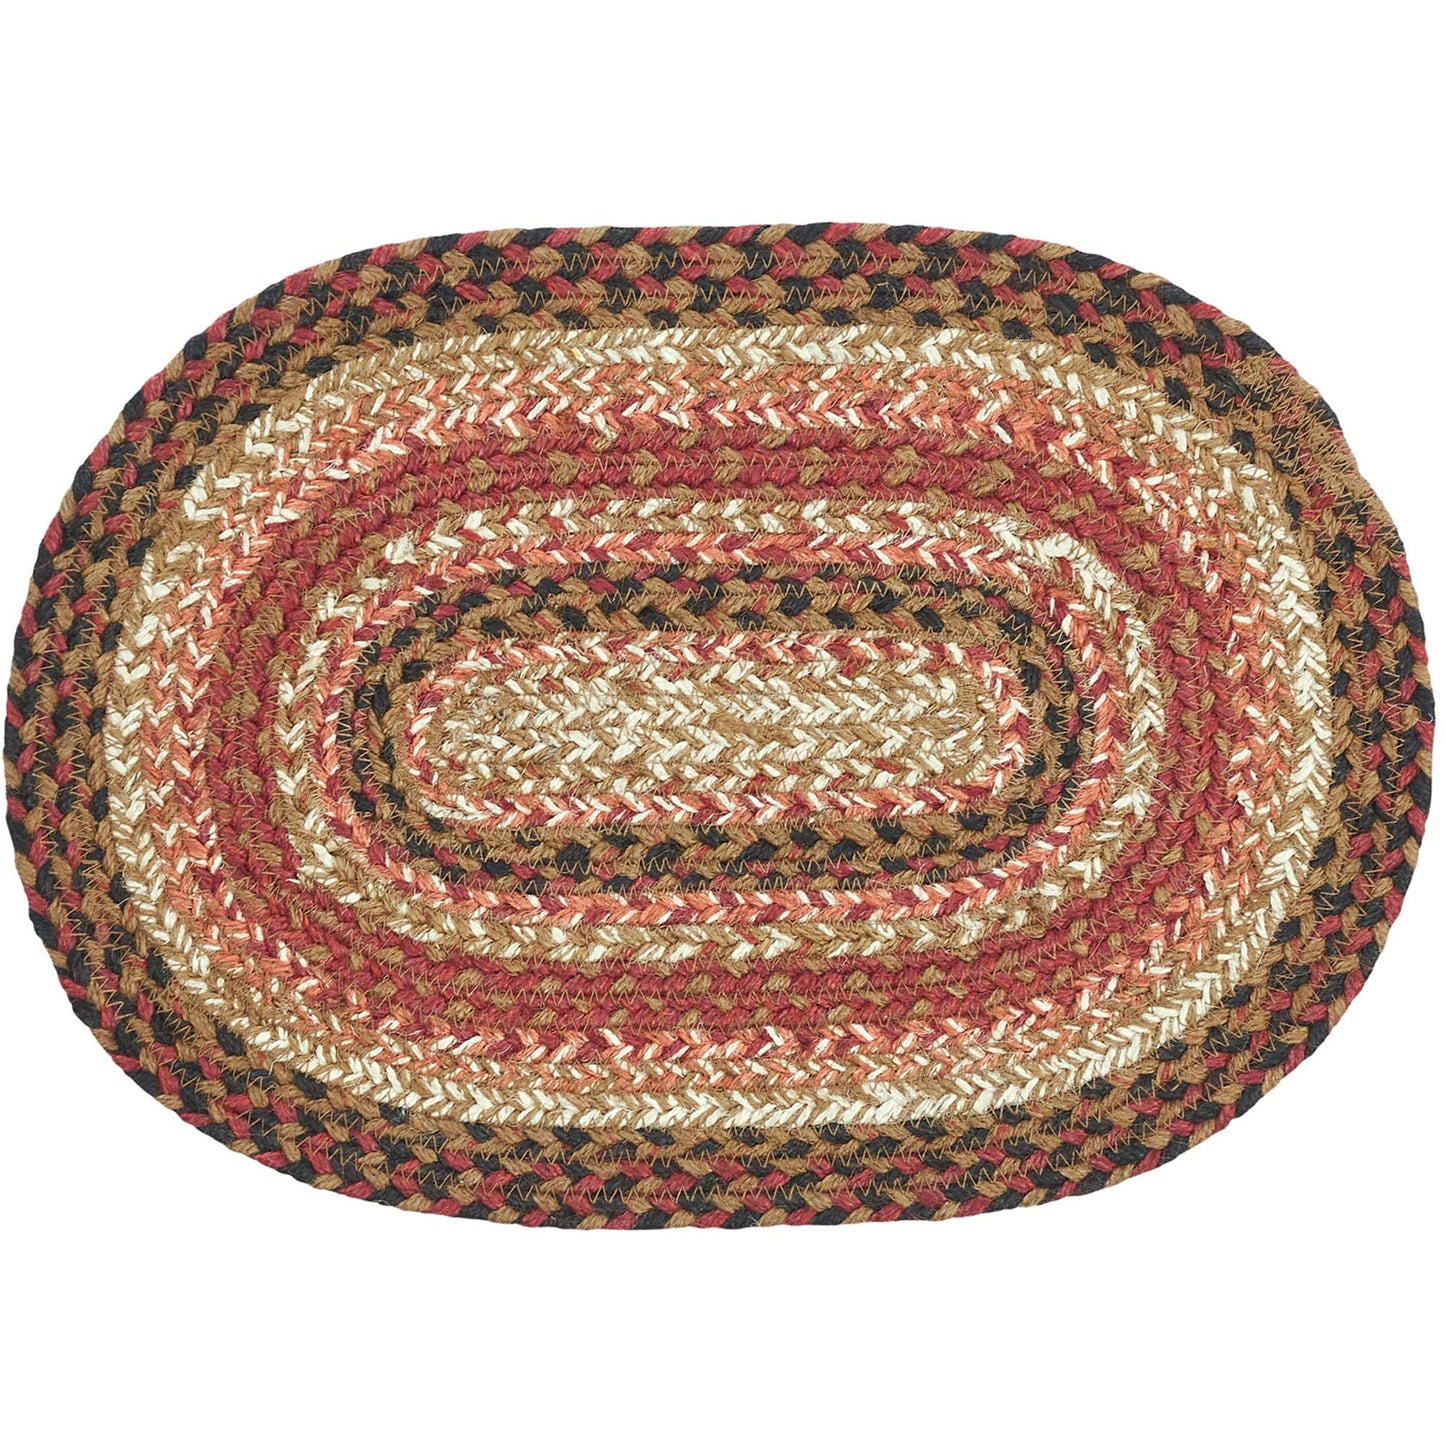 67130-Ginger-Spice-Jute-Oval-Placemat-10x15-image-4